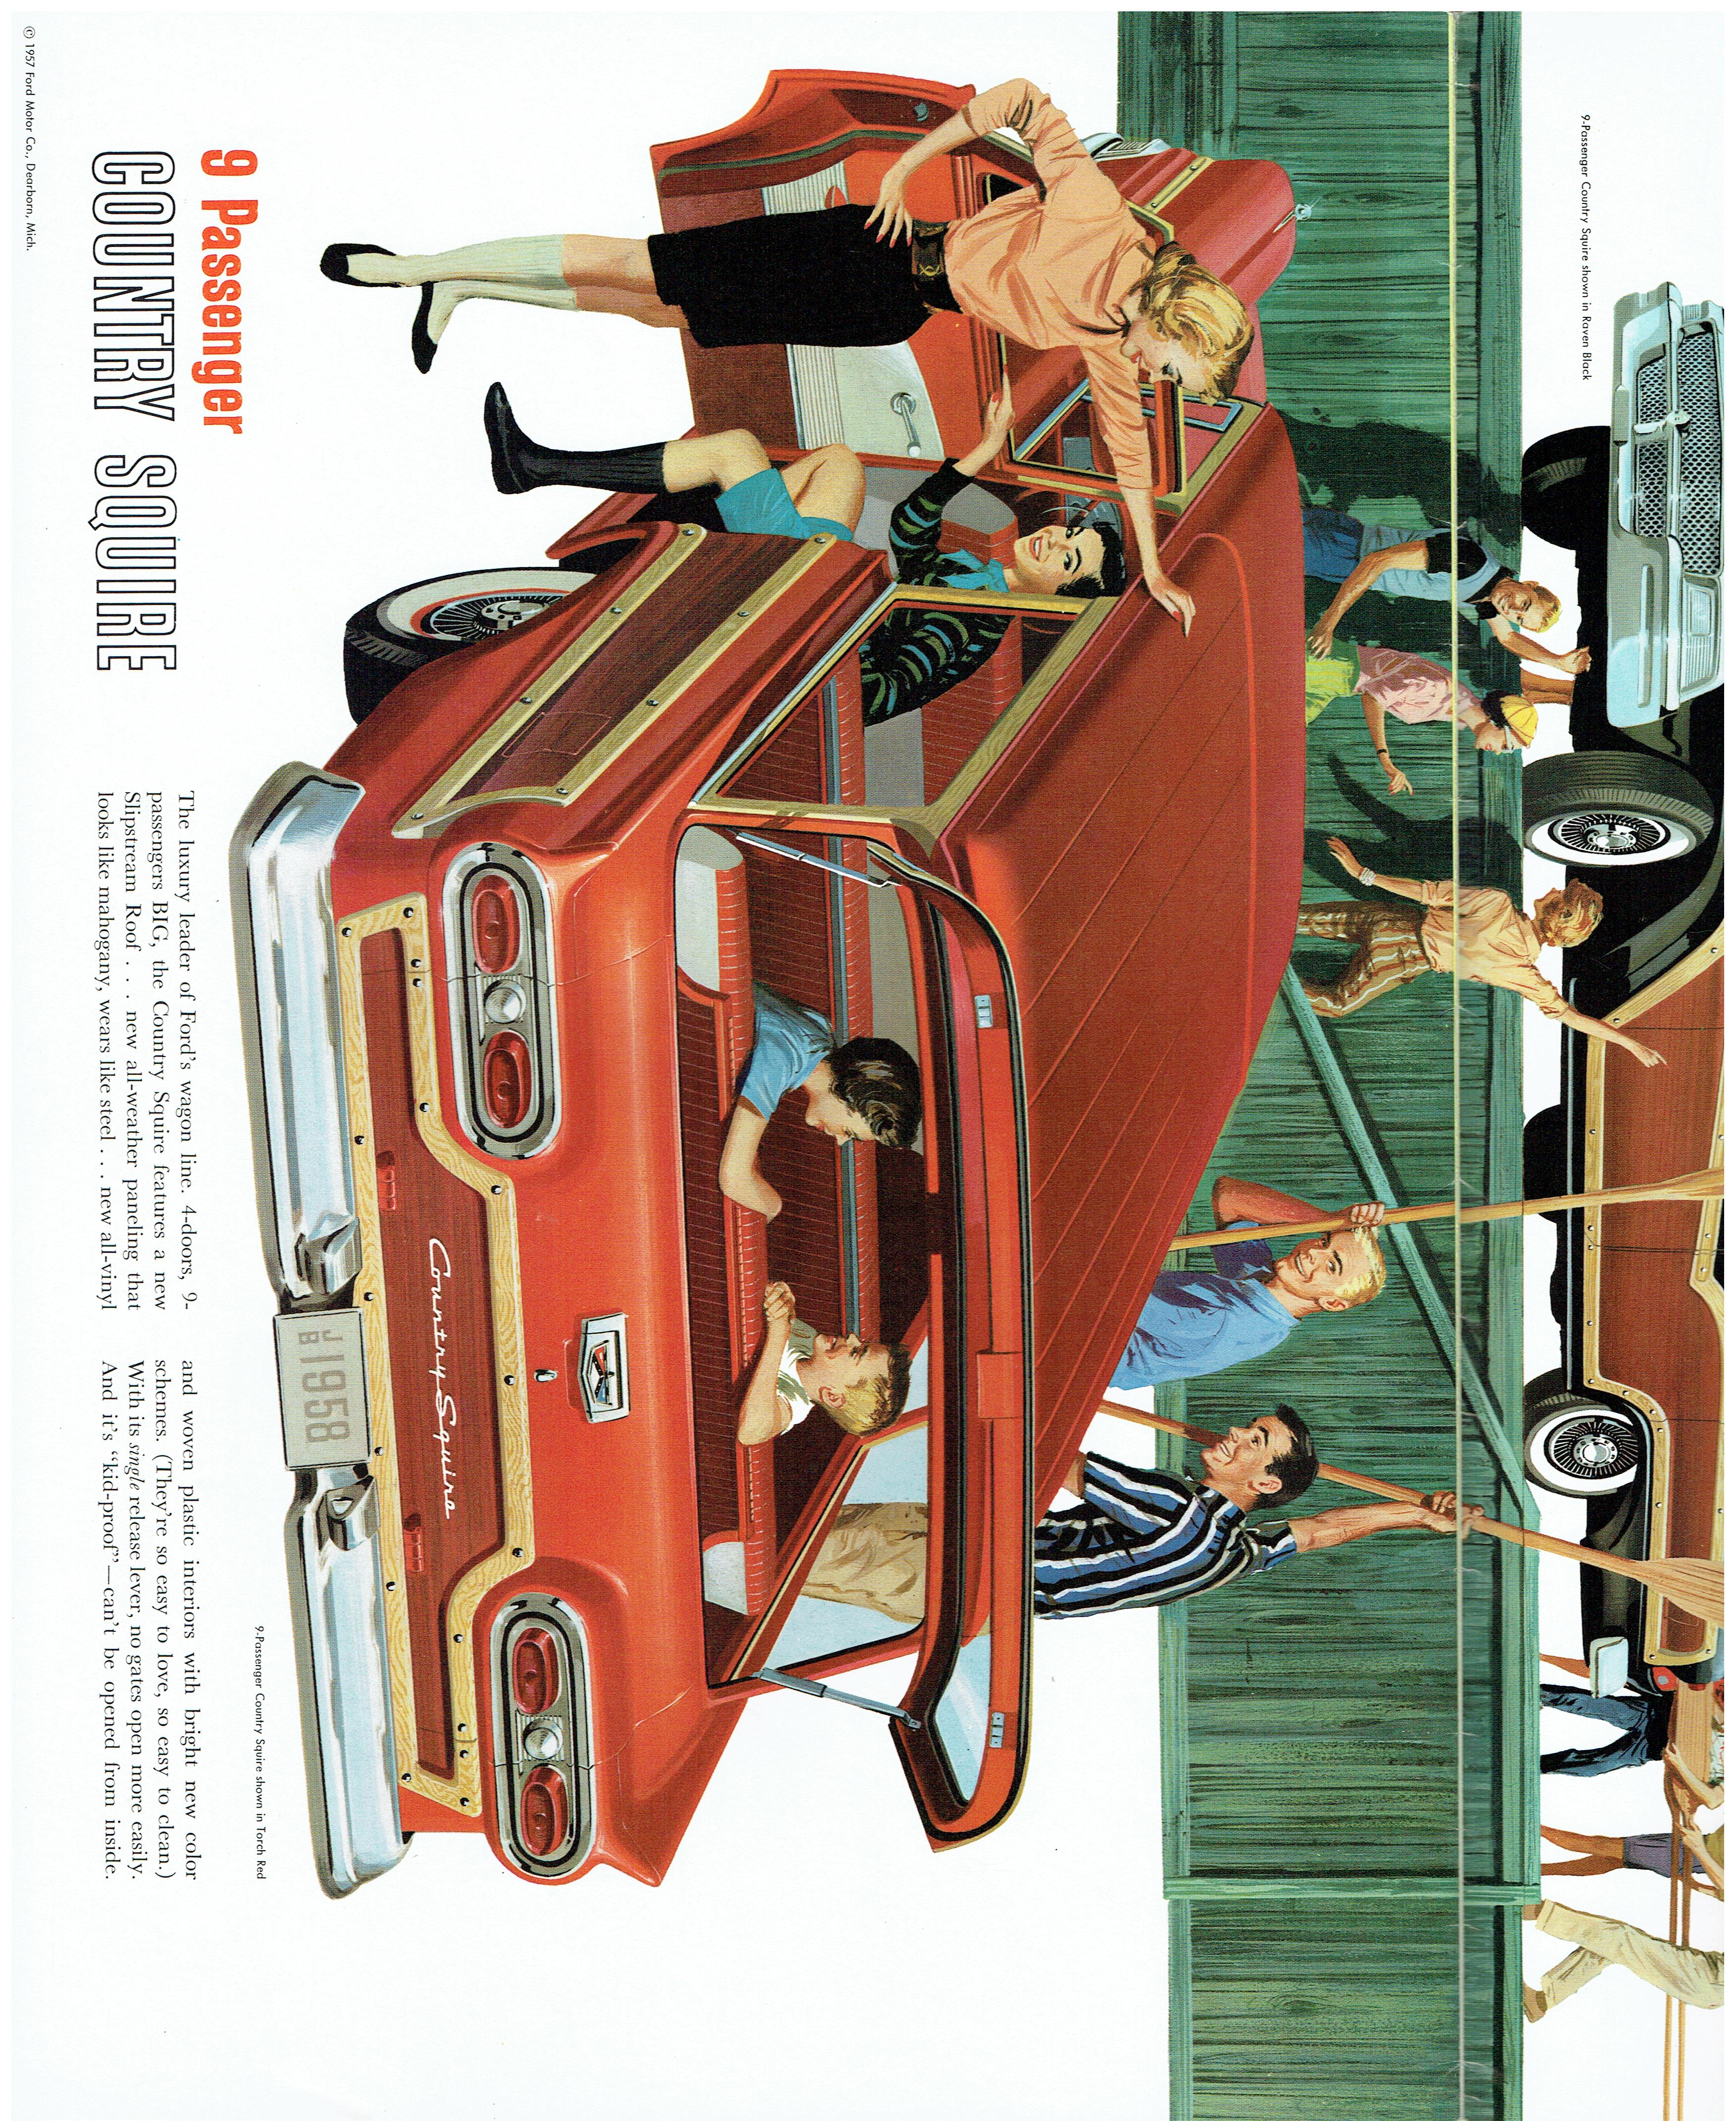 1958 Ford Station Wagons 9-57 (3)